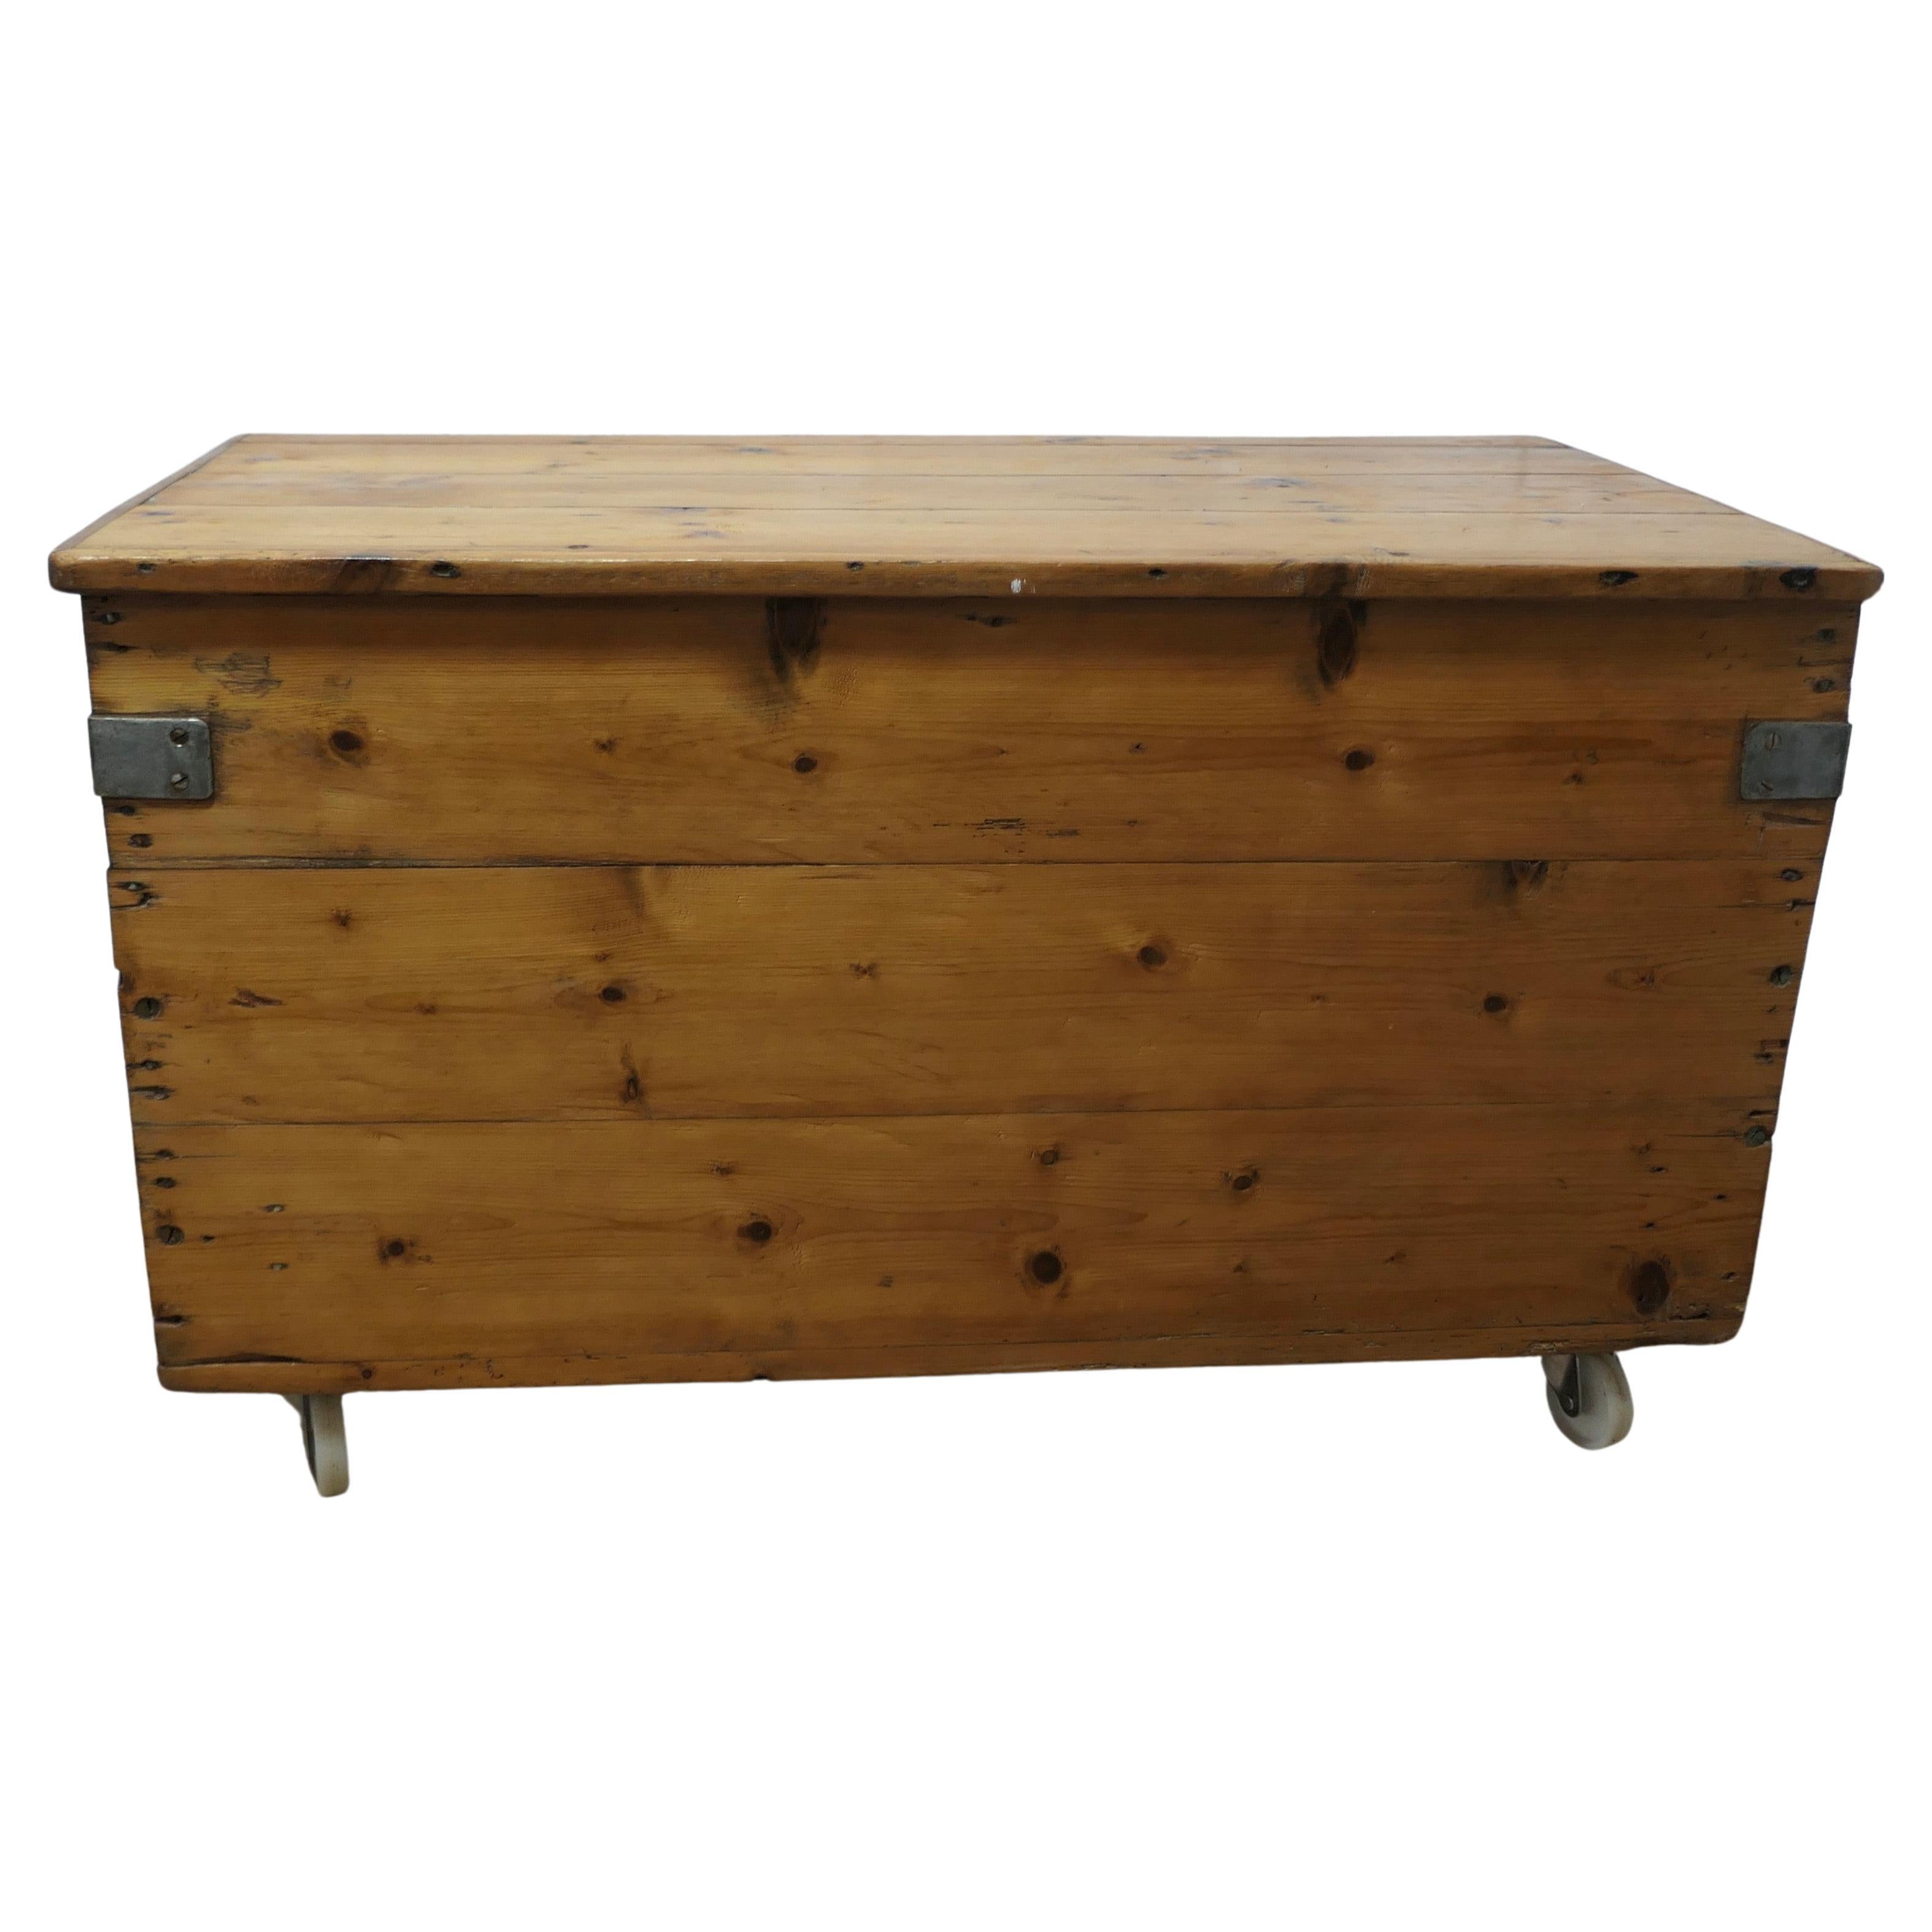 Strong Victorian Pine Blanket Box set on Wheels  This is a good heavy piece